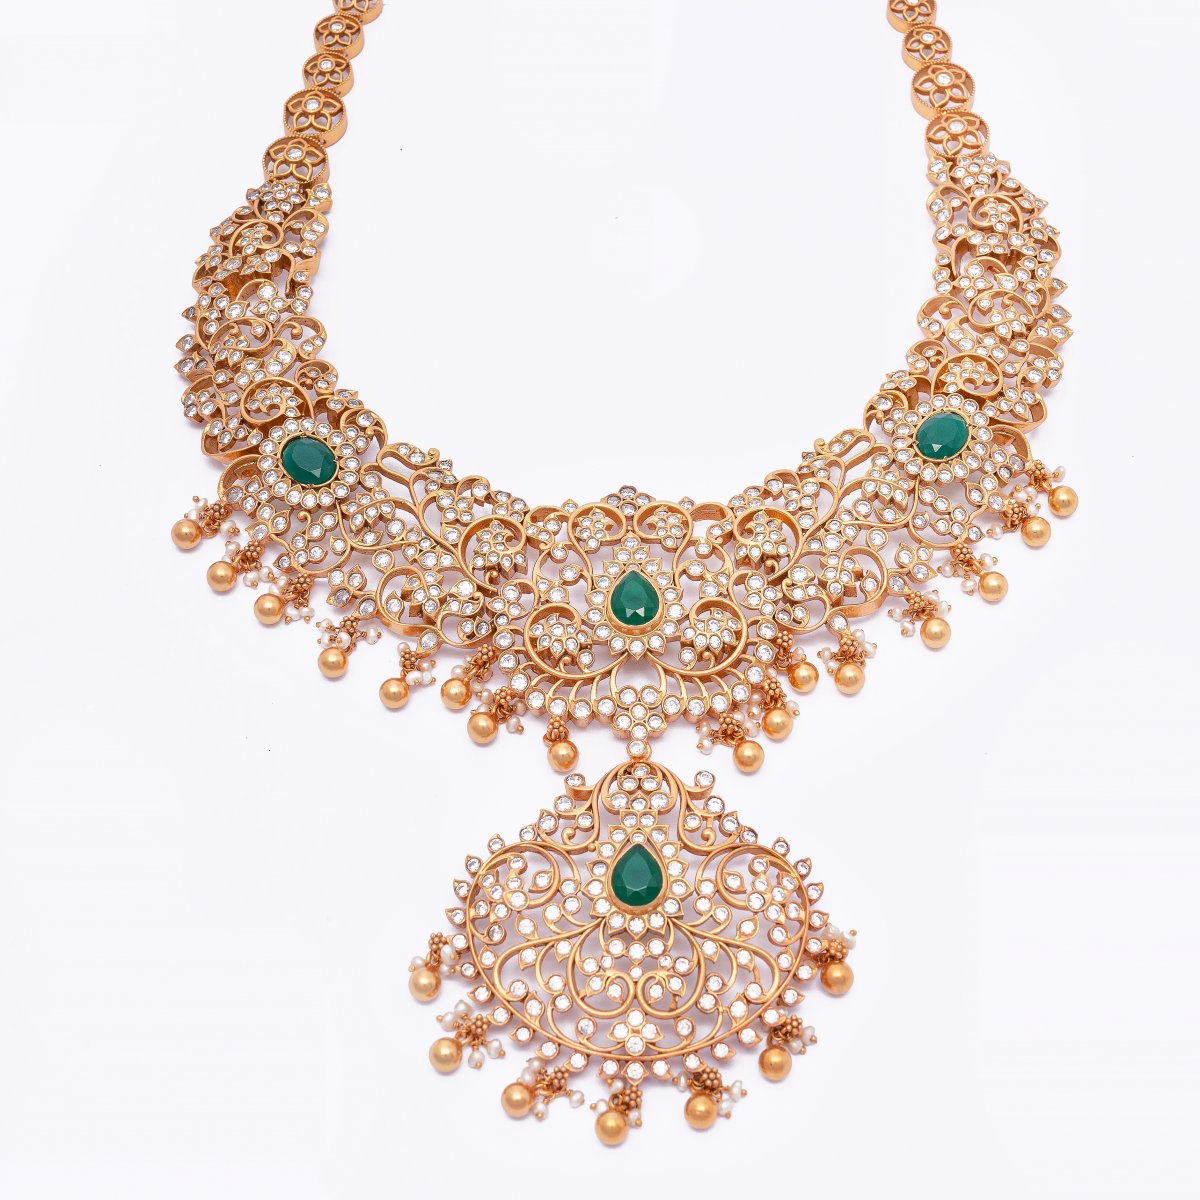 GOLD POLISHED TRADITIONAL PARTY SILVER NECKLACE FOR WOMEN 